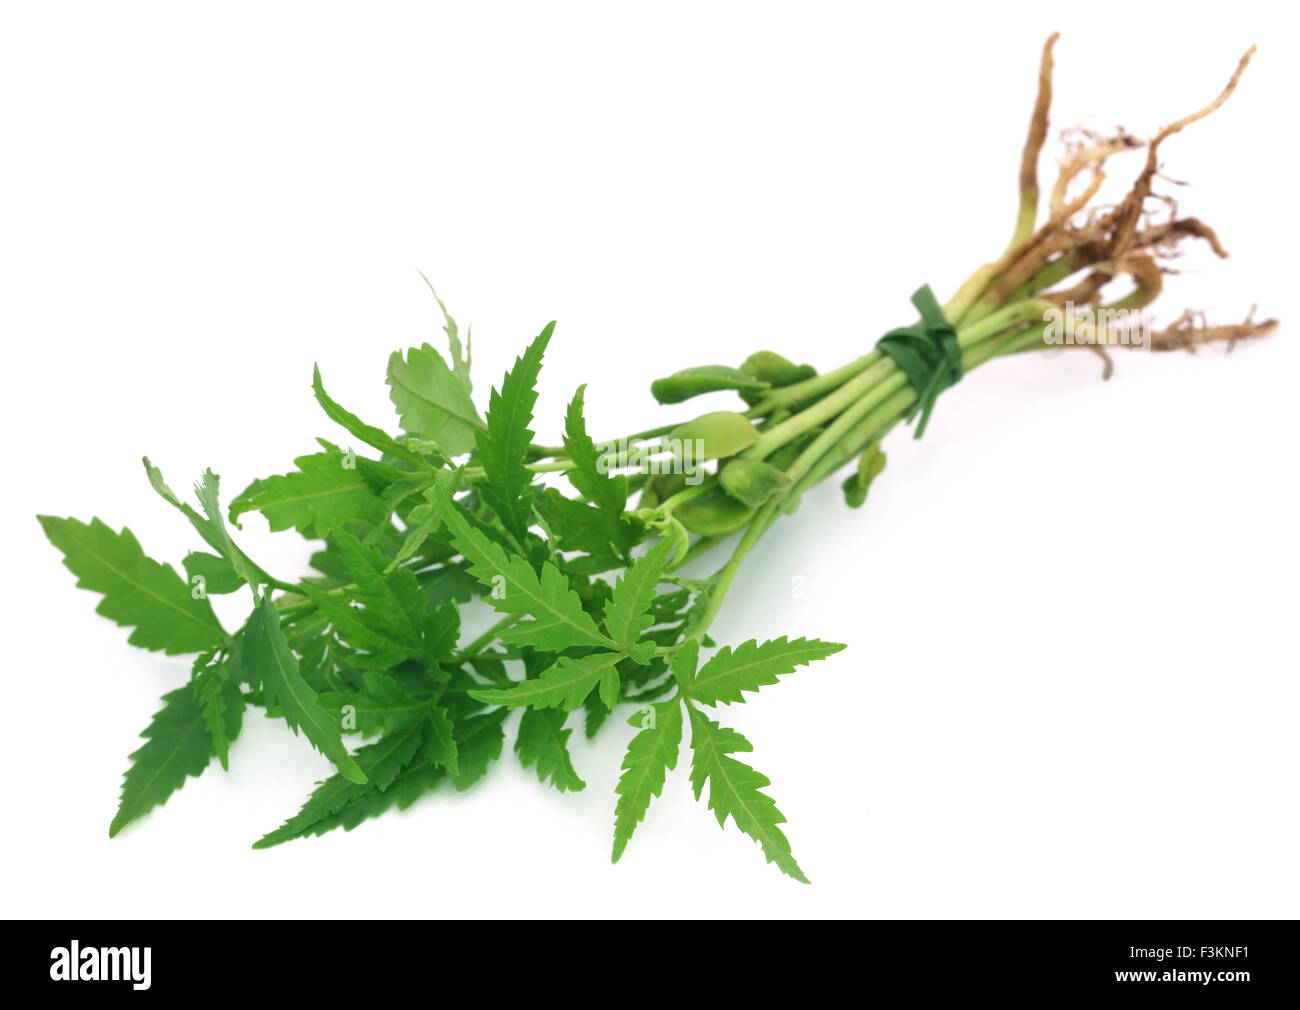 Bunch of neem plant over white background Stock Photo